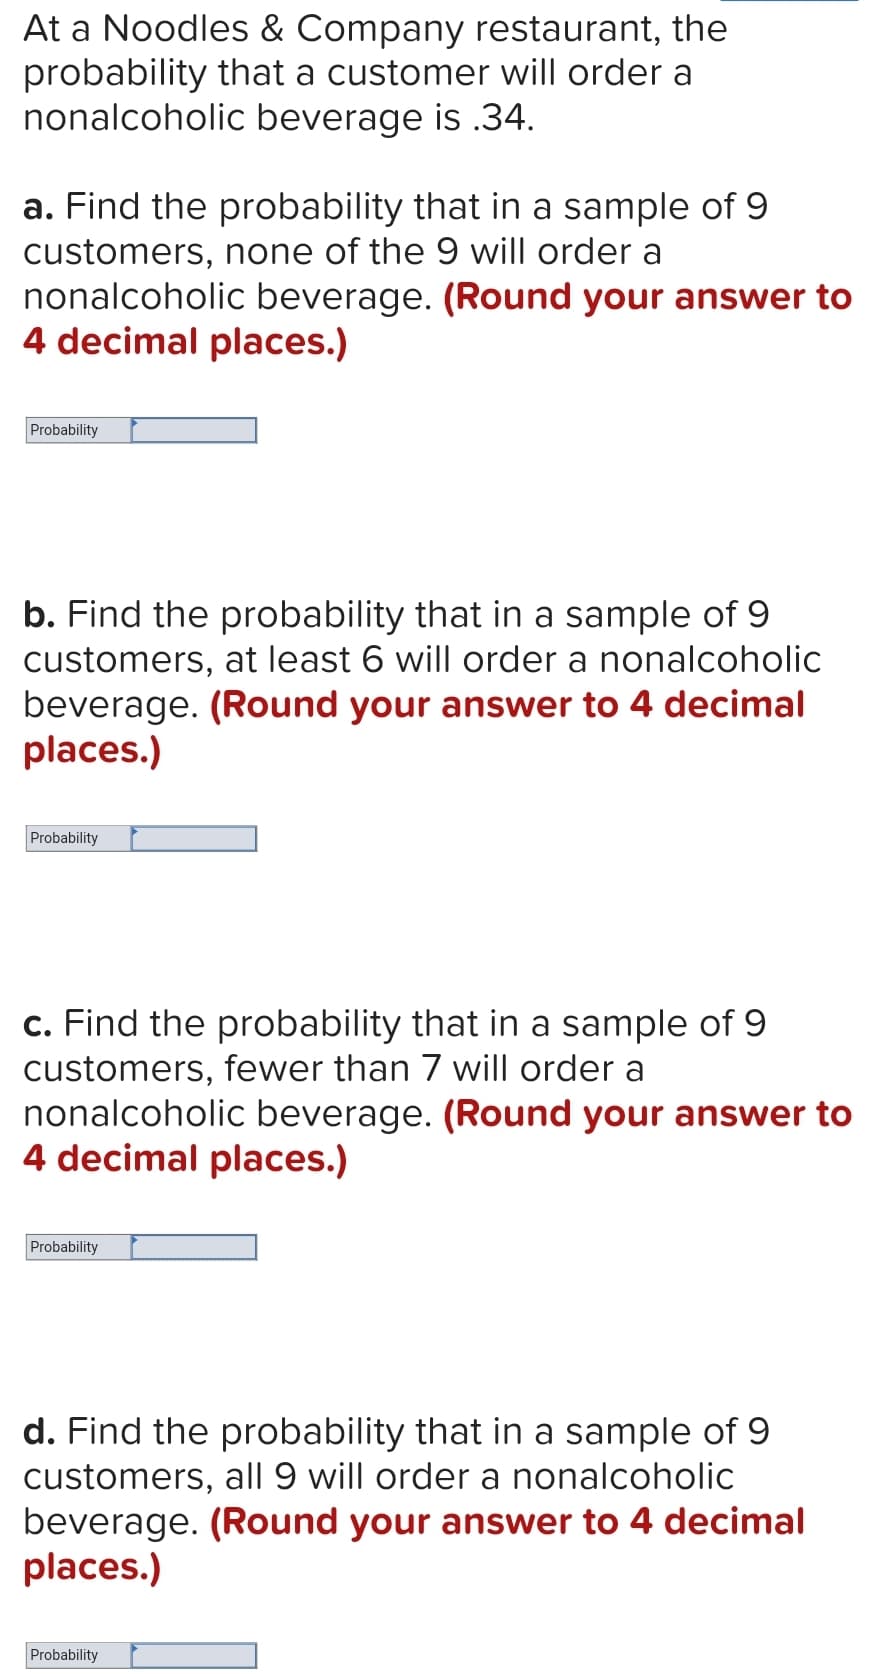 At a Noodles & Company restaurant, the
probability that a customer will order a
nonalcoholic beverage is .34.
a. Find the probability that in a sample of 9
customers, none of the 9 will order a
nonalcoholic beverage. (Round your answer to
4 decimal places.)
Probability
b. Find the probability that in a sample of 9
customers, at least 6 will order a nonalcoholic
beverage. (Round your answer to 4 decimal
places.)
Probability
c. Find the probability that in a sample of 9
customers, fewer than 7 will order a
nonalcoholic beverage. (Round your answer to
4 decimal places.)
Probability
d. Find the probability that in a sample of 9
customers, all 9 will order a nonalcoholic
beverage. (Round your answer to 4 decimal
places.)
Probability
